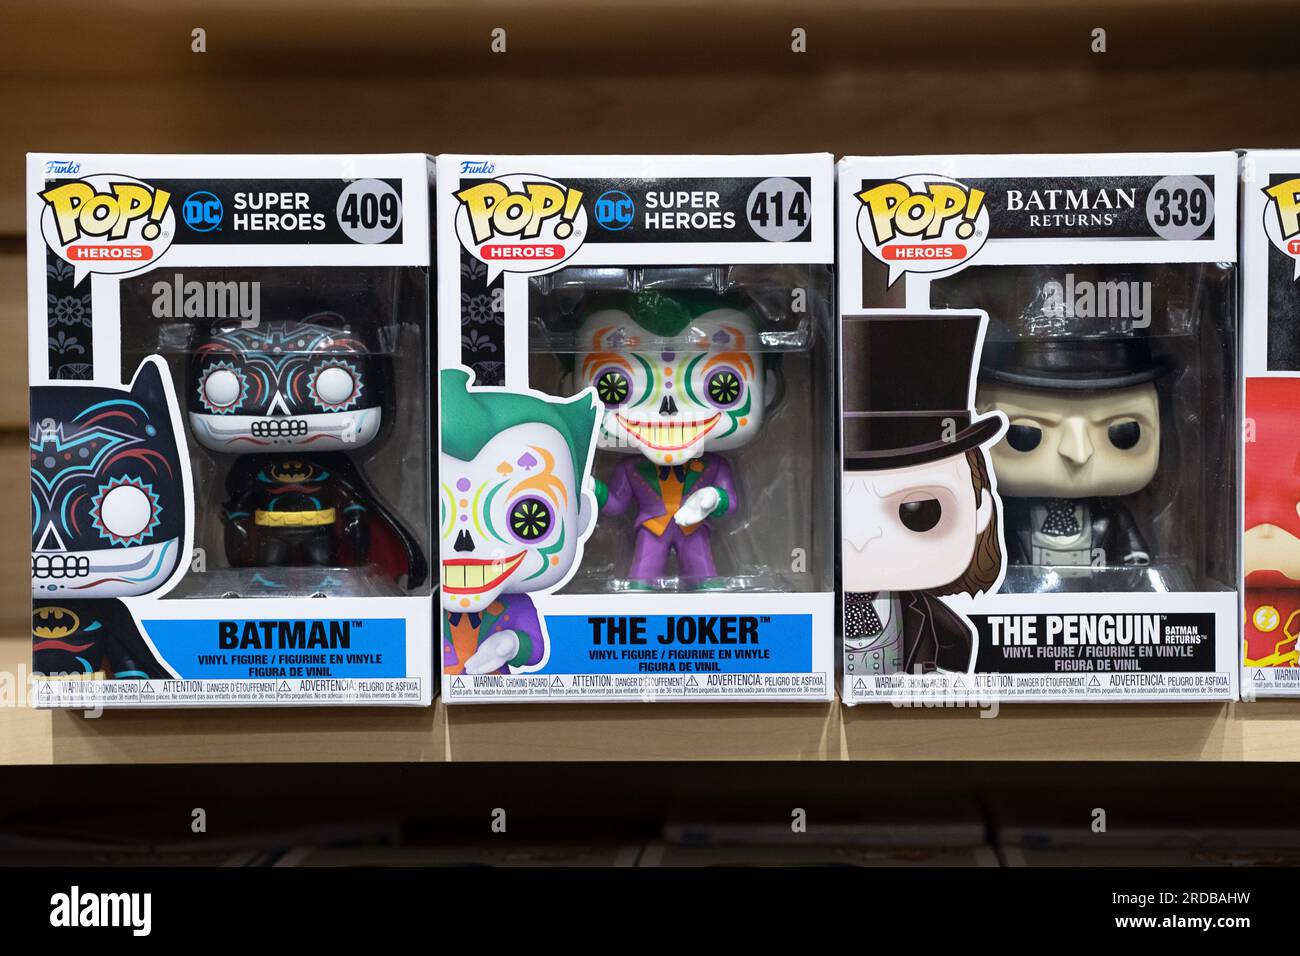 3 Batman related Funko Pop figurines for sale at  Newbury Comics, a store in the Danbury Fair Mall in Connecticut. Stock Photo